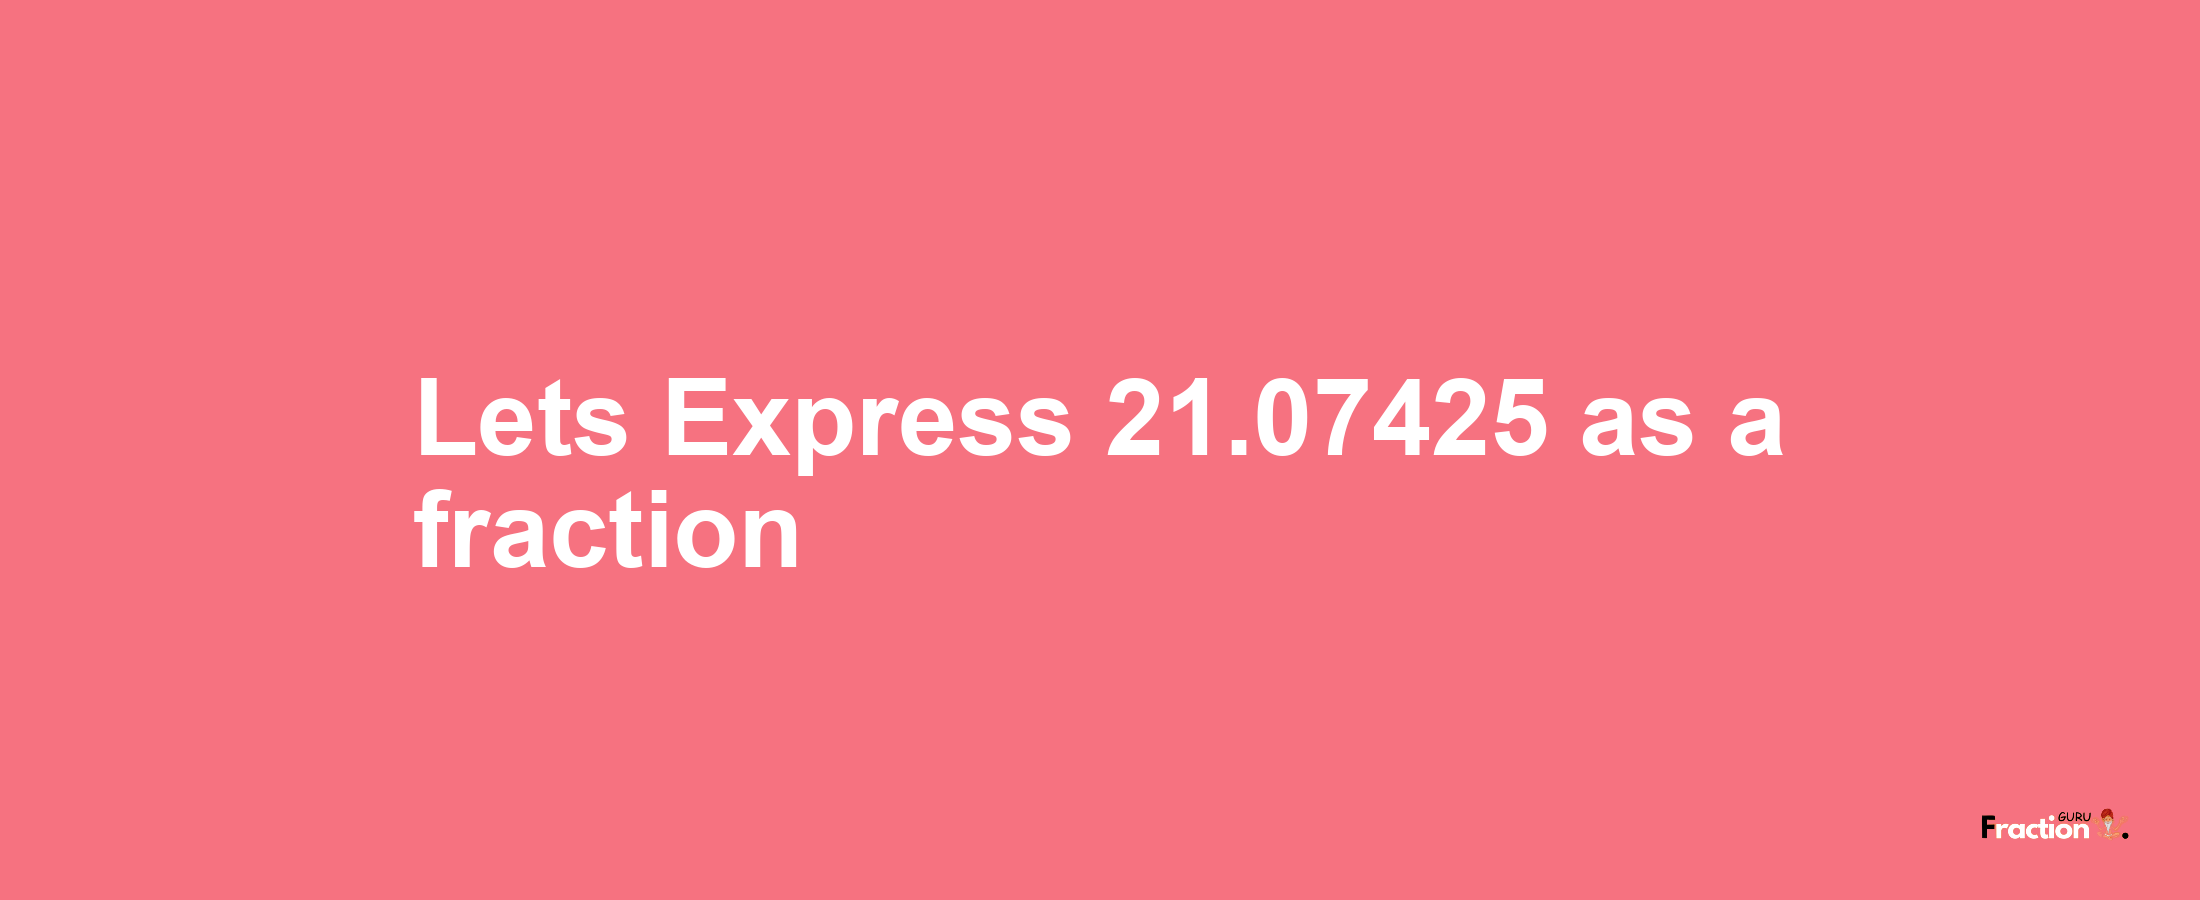 Lets Express 21.07425 as afraction